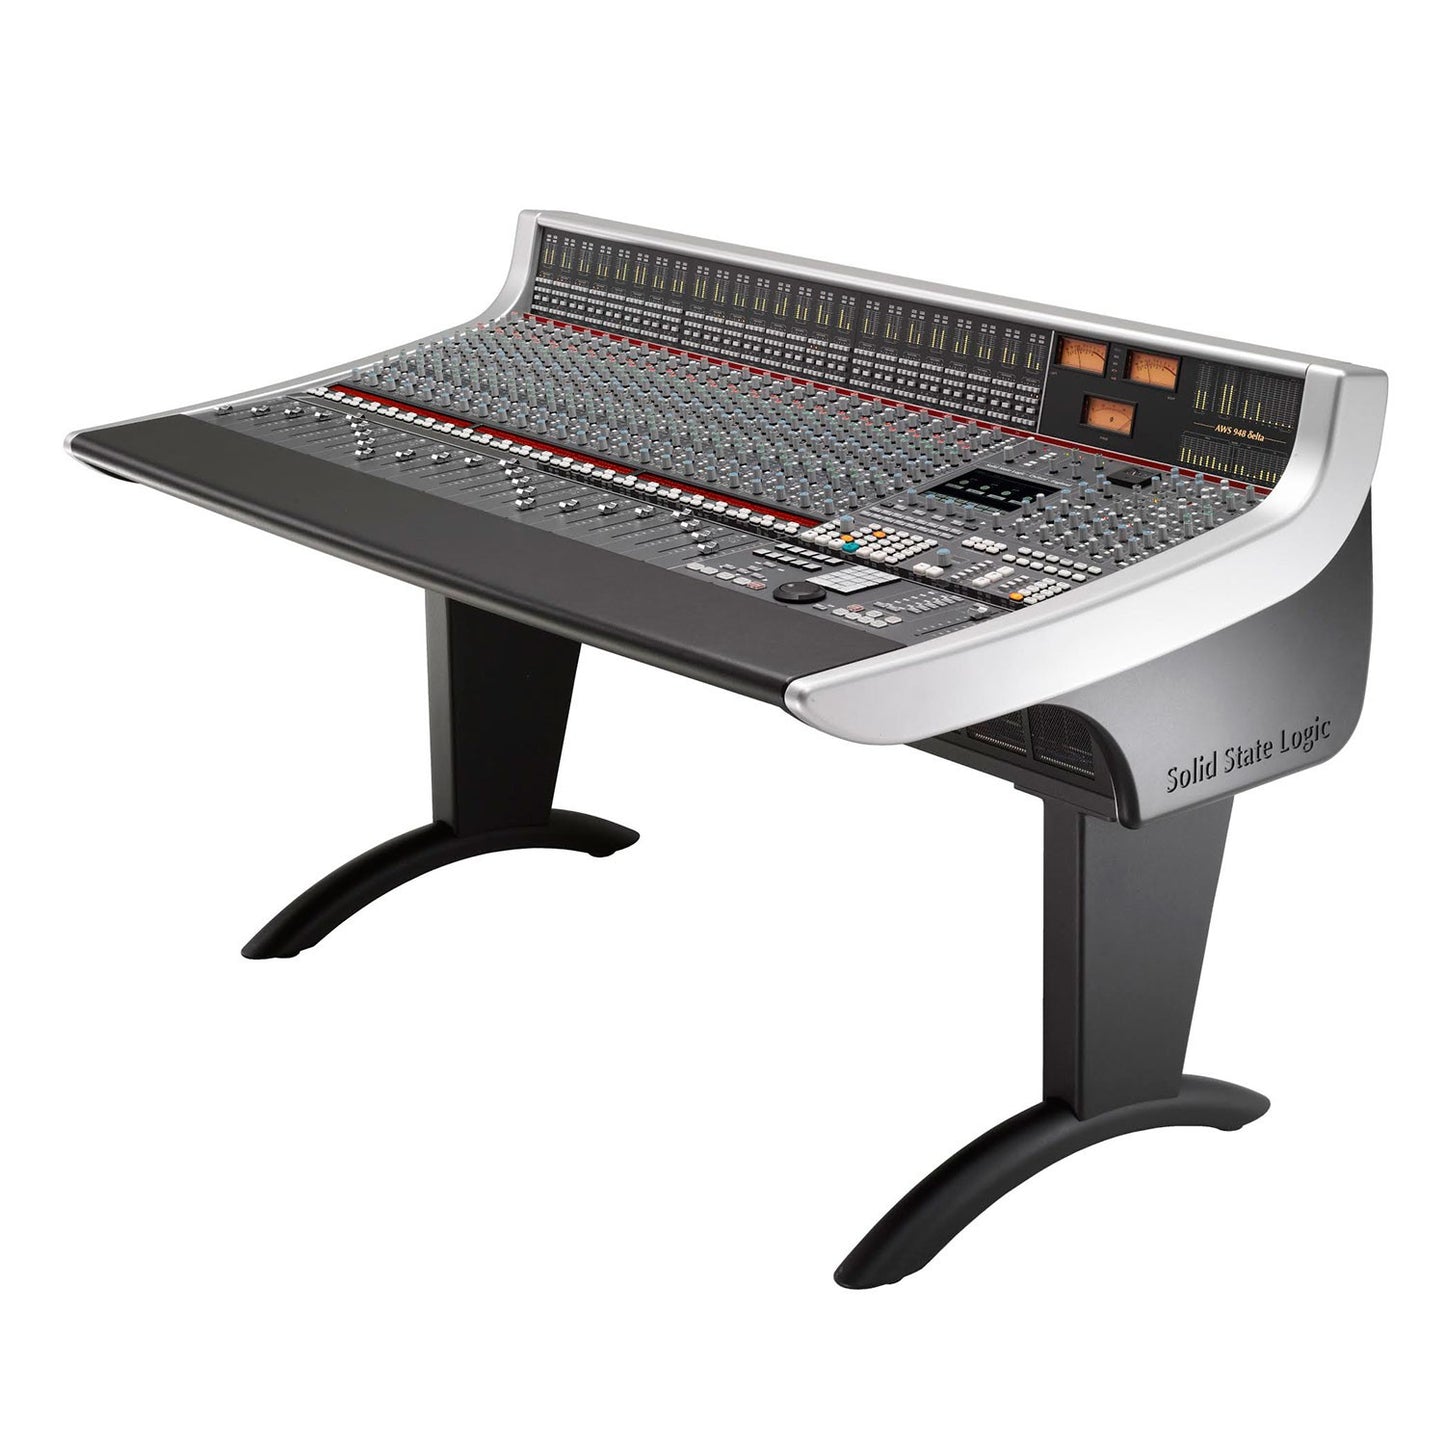 Solid State Logic AWS 948 Delta Analog Console DAW Controller